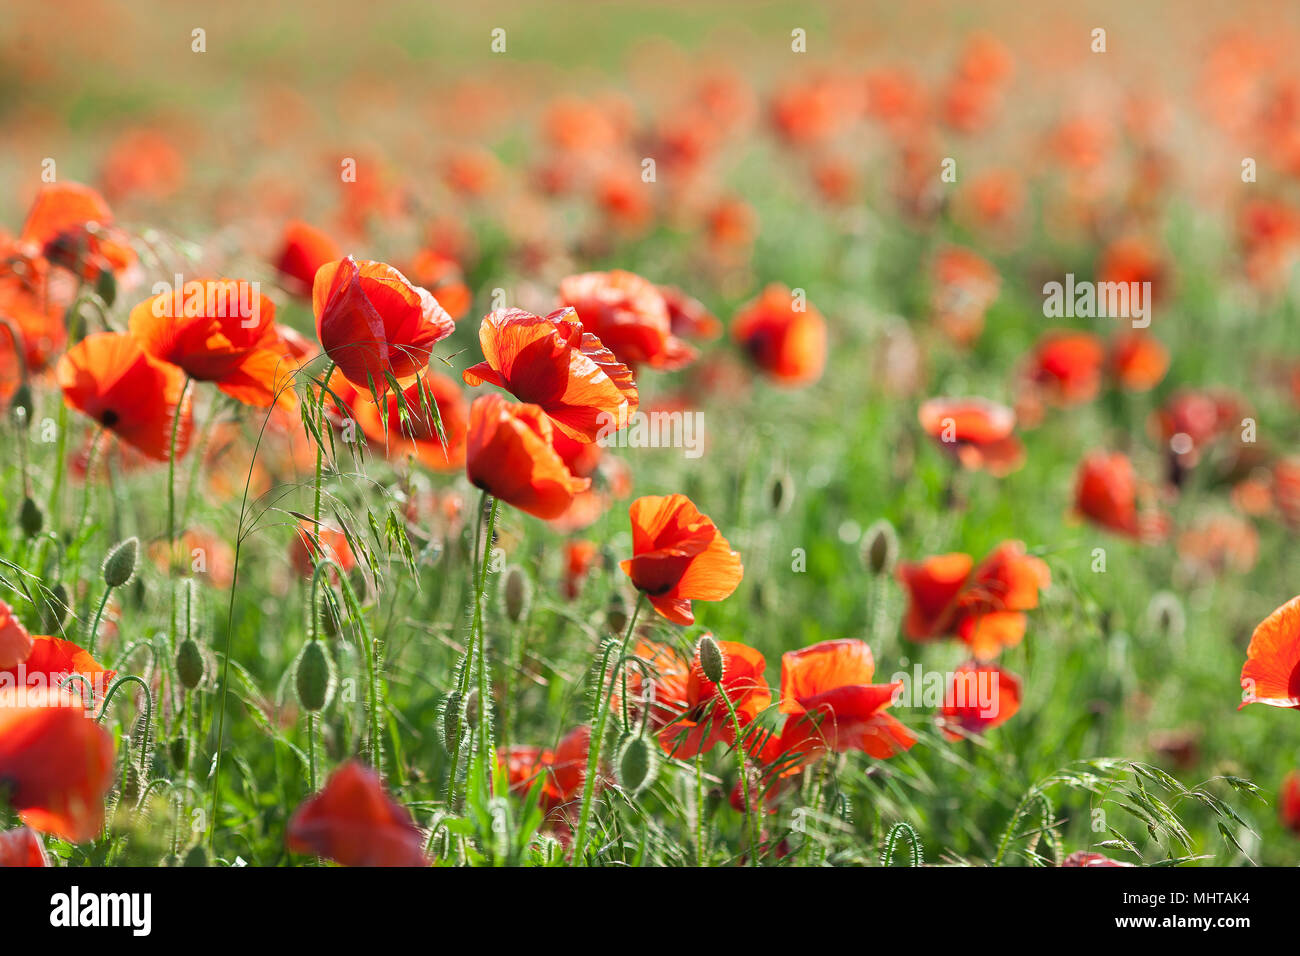 Poppy farming, nature, spring, fresh red field, agriculture concept - farming of poppy flowers - close-up flowers and stems of the red poppy field Stock Photo - Alamy